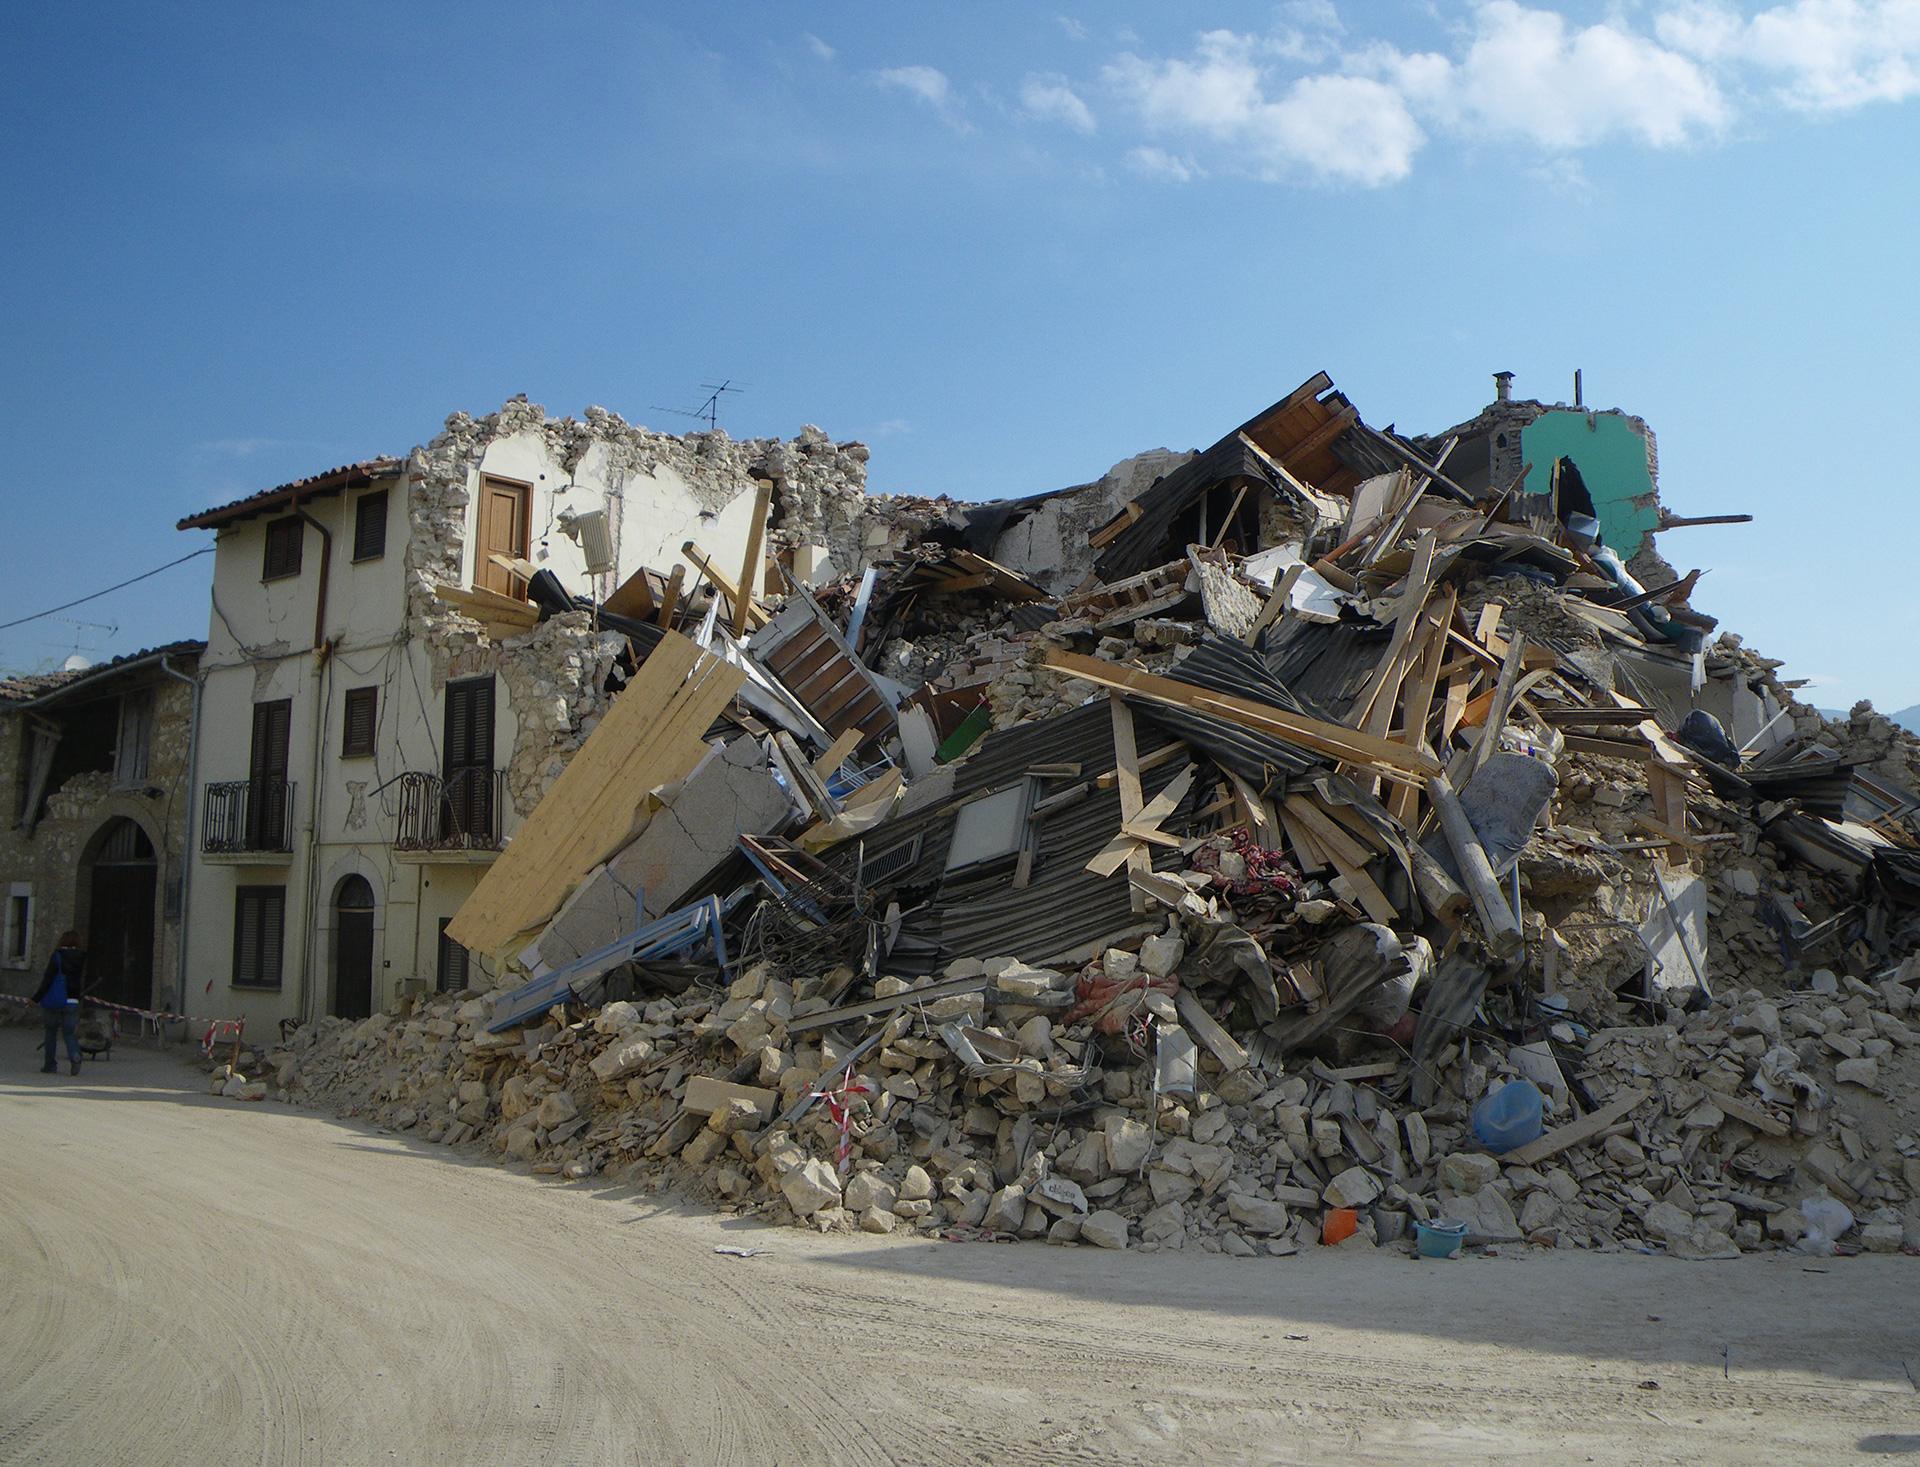 Collapse of houses following the Abruzzo earthquake in Italy 